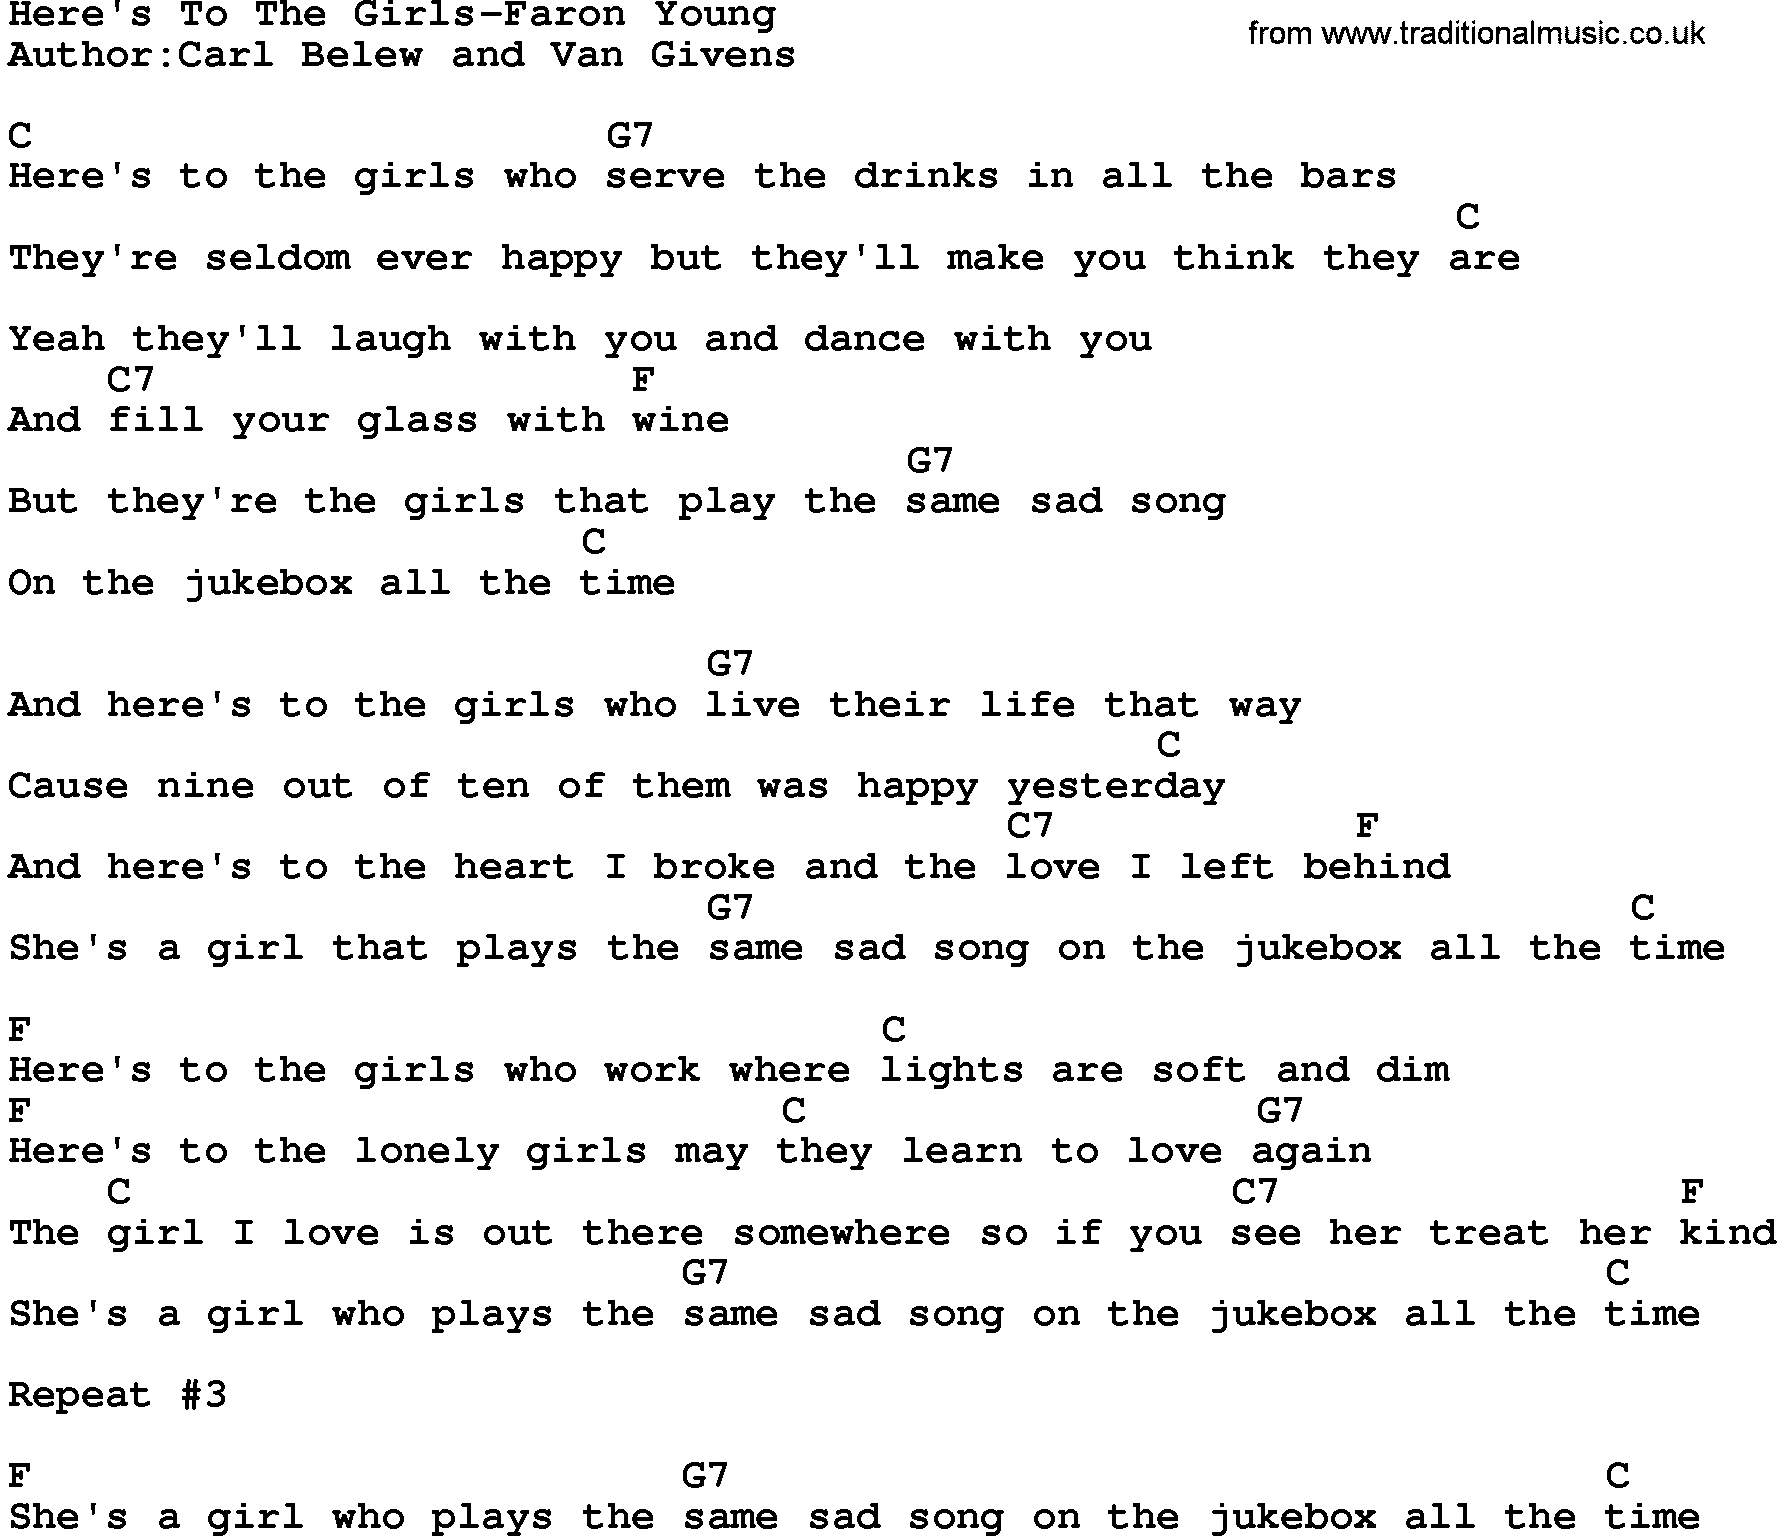 Country music song: Here's To The Girls-Faron Young lyrics and chords